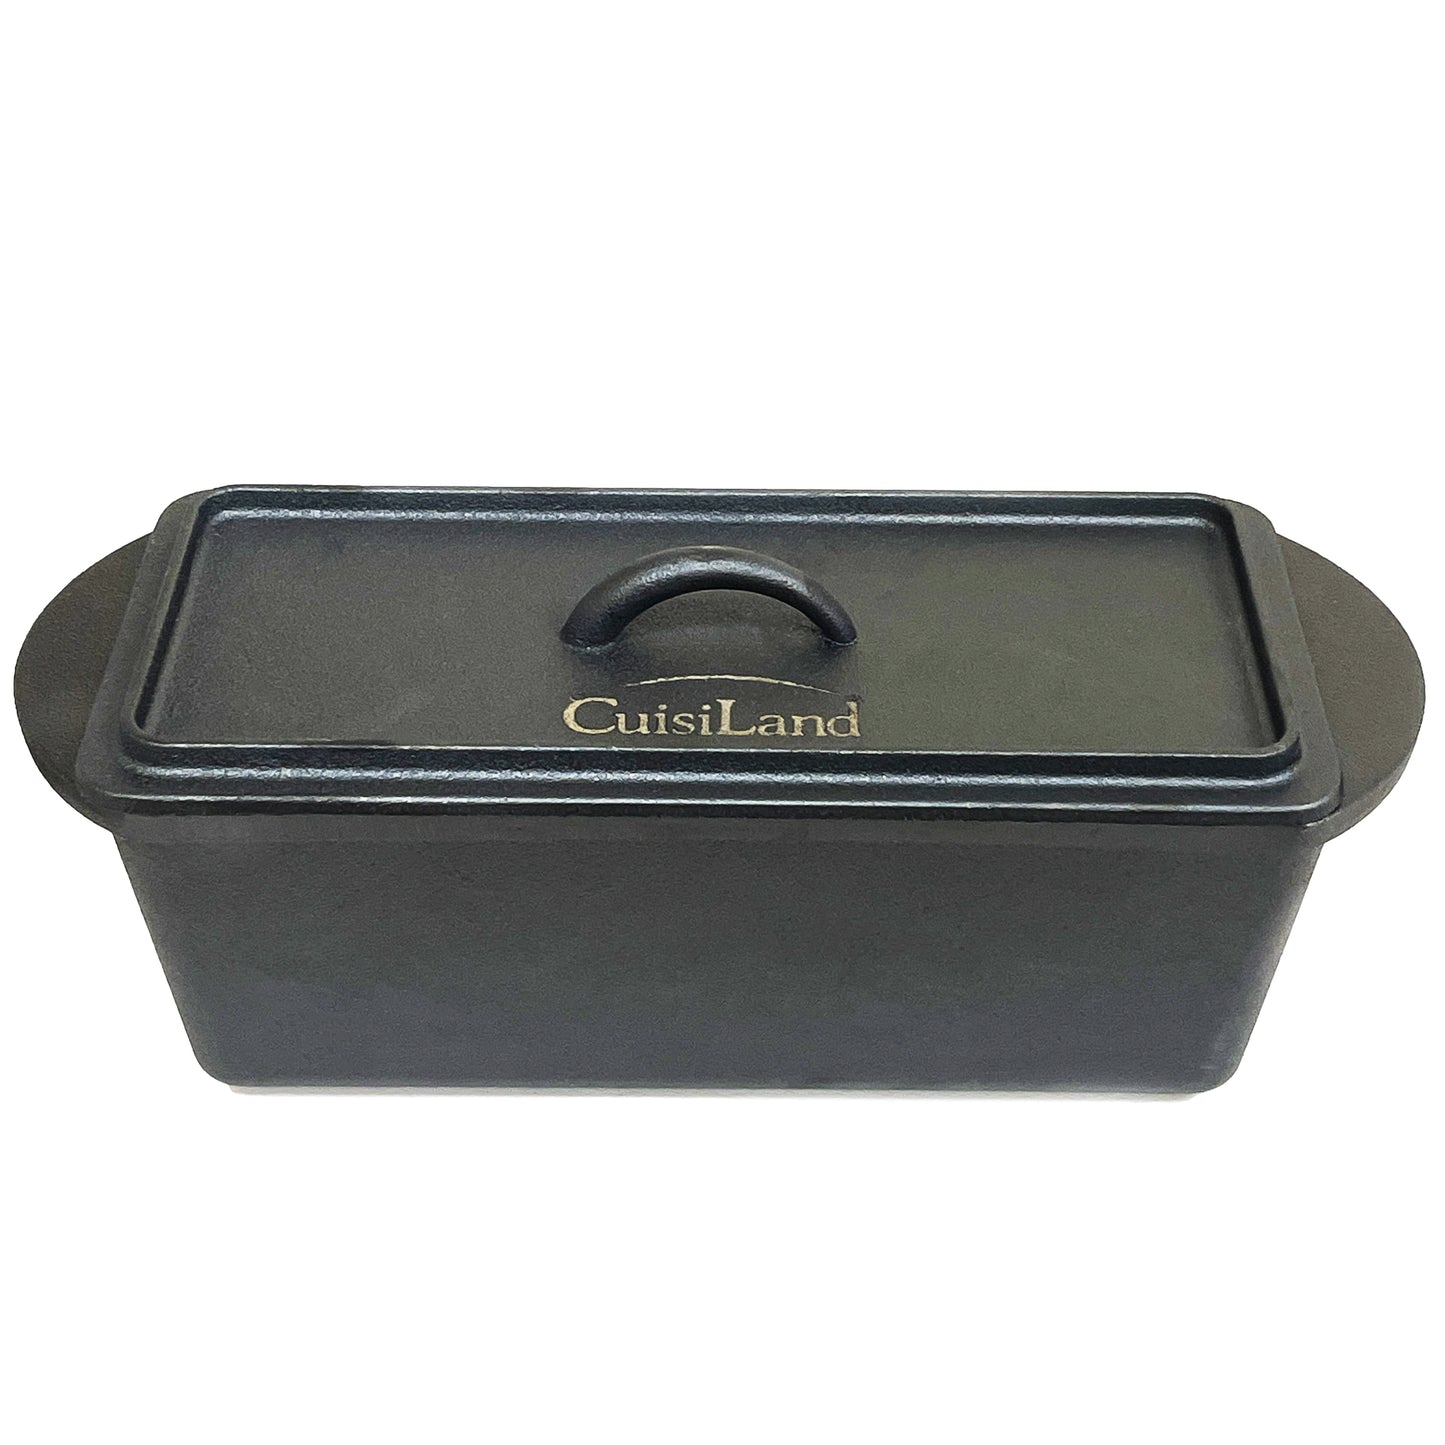 Cuisiland Cast Iron Rectangular Bread Loaf Pan, Heavy Duty 11x4.75x4,25" (14"L/Handles)  with Lid